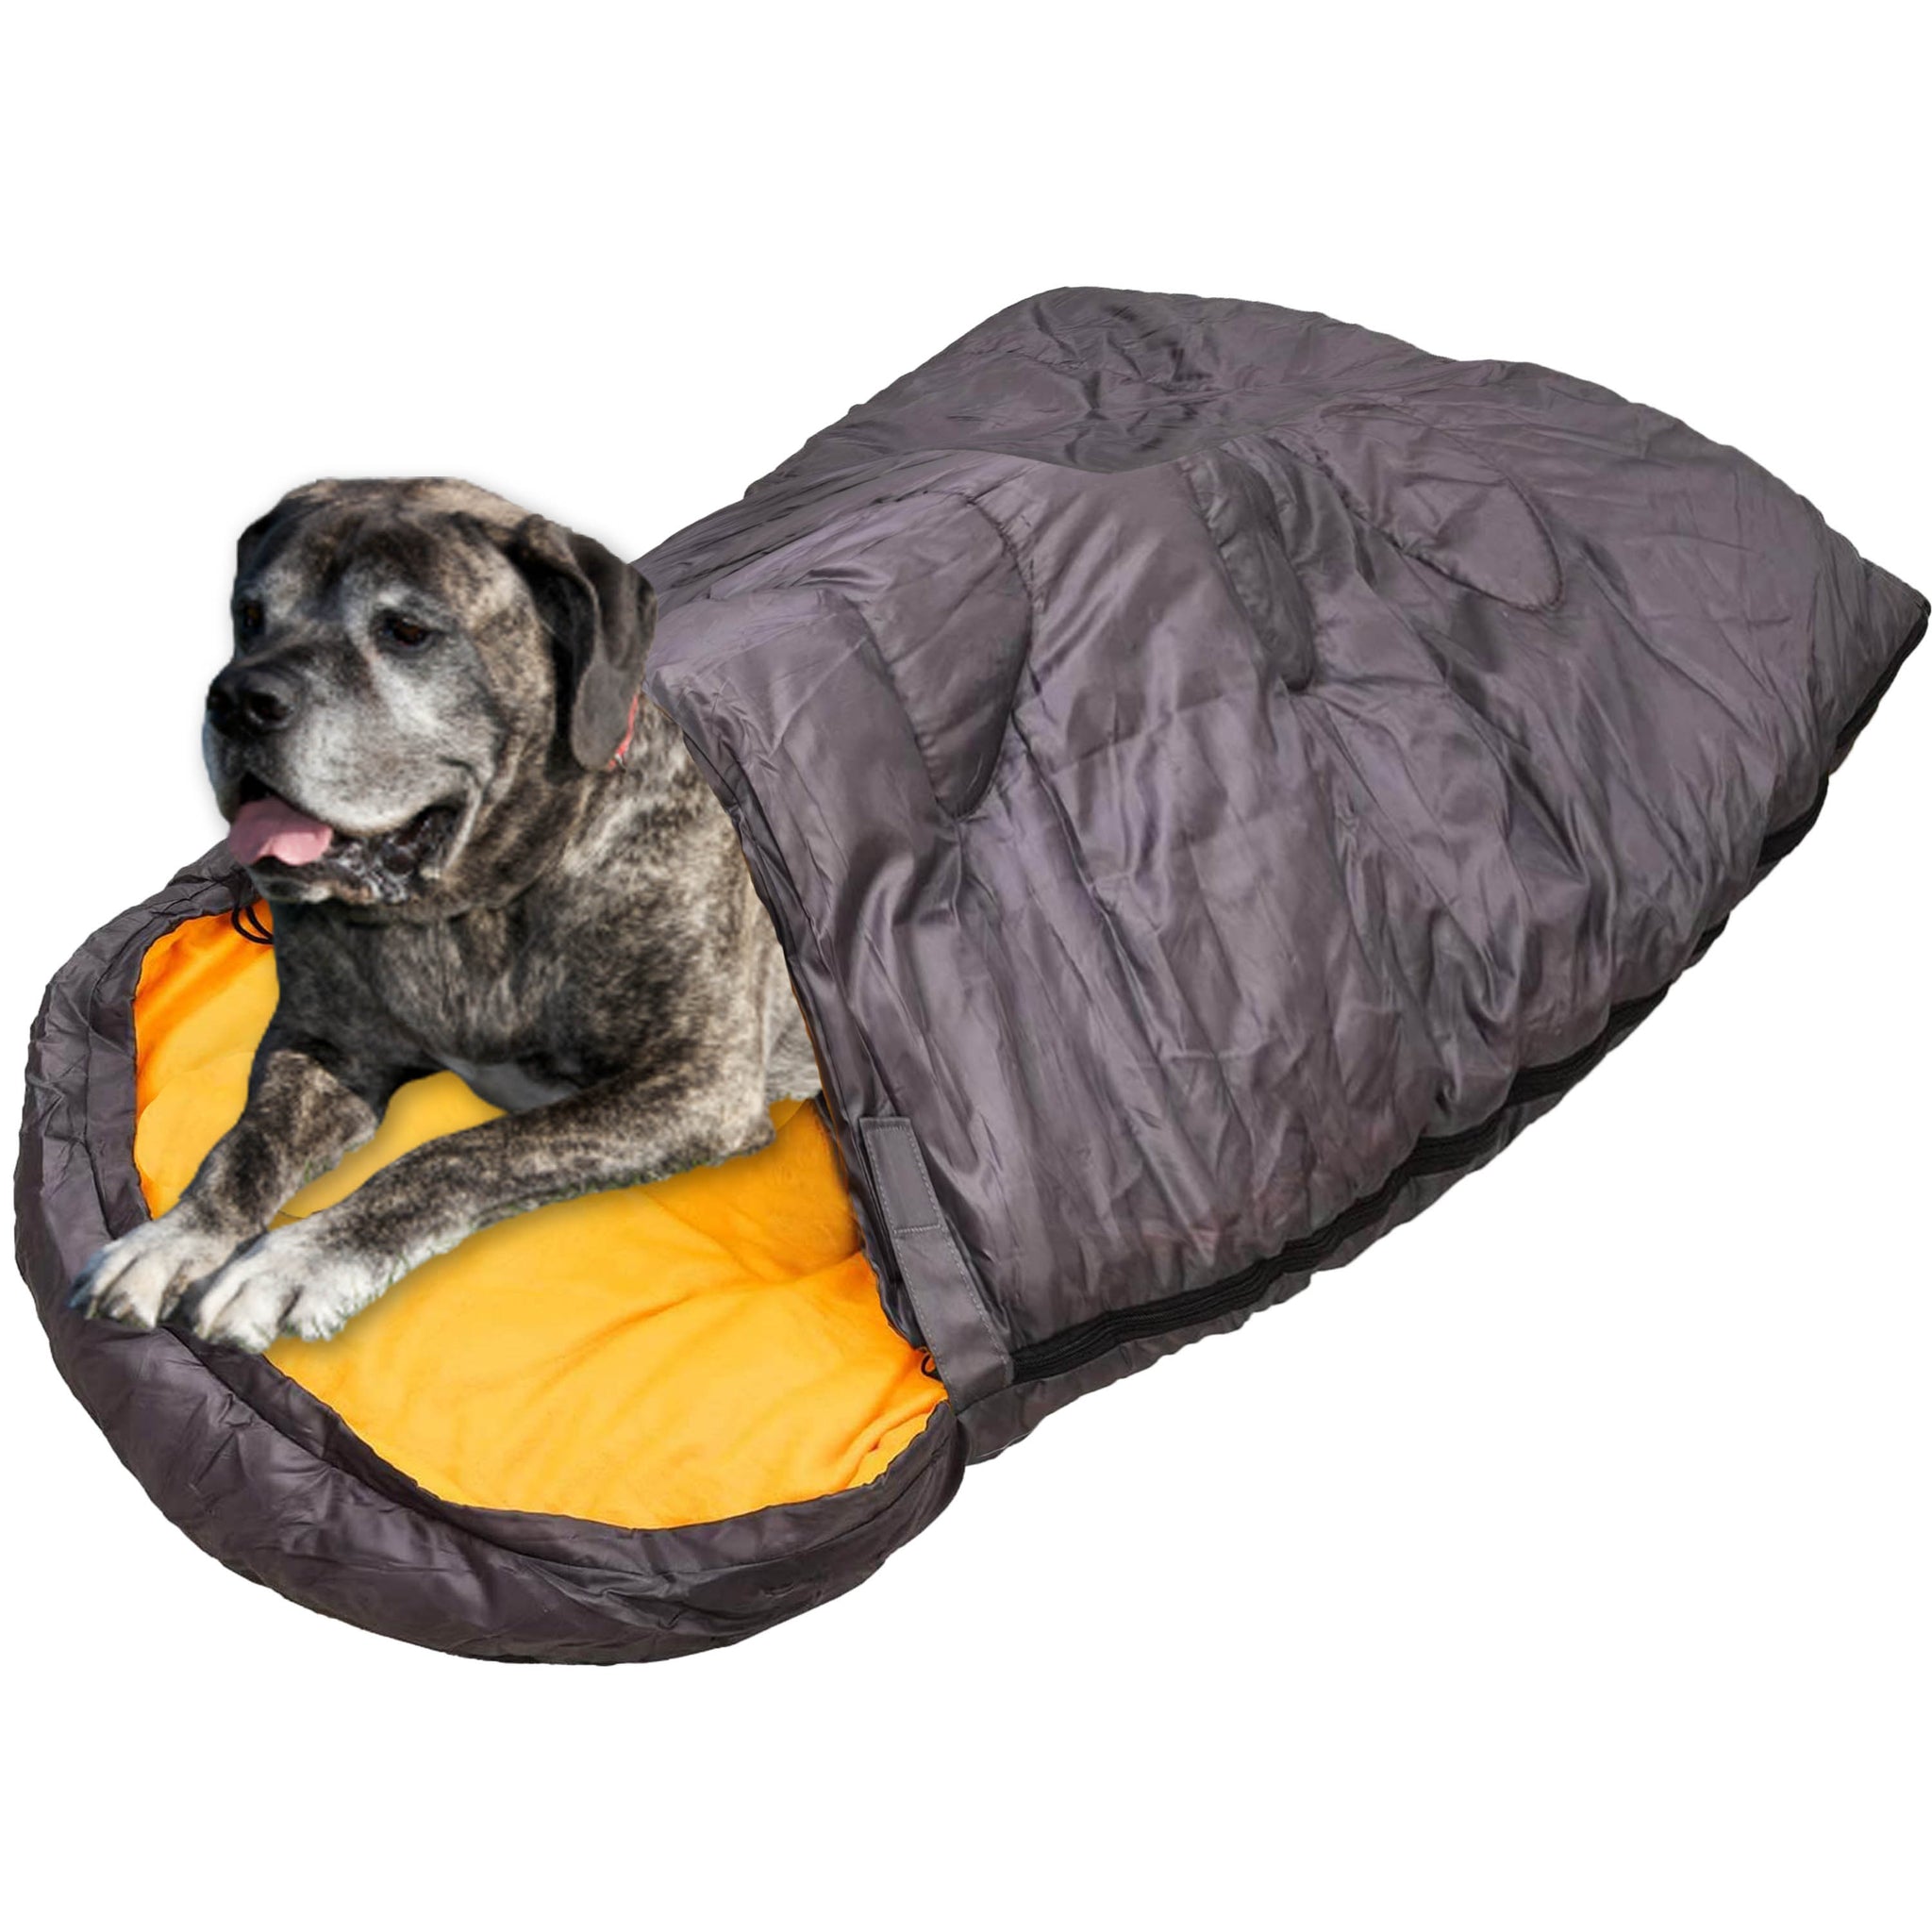 Dog Sleeping Bag Large | Travel Bed for Camping and Backpacking | Warm | Portable | Easy to Clean